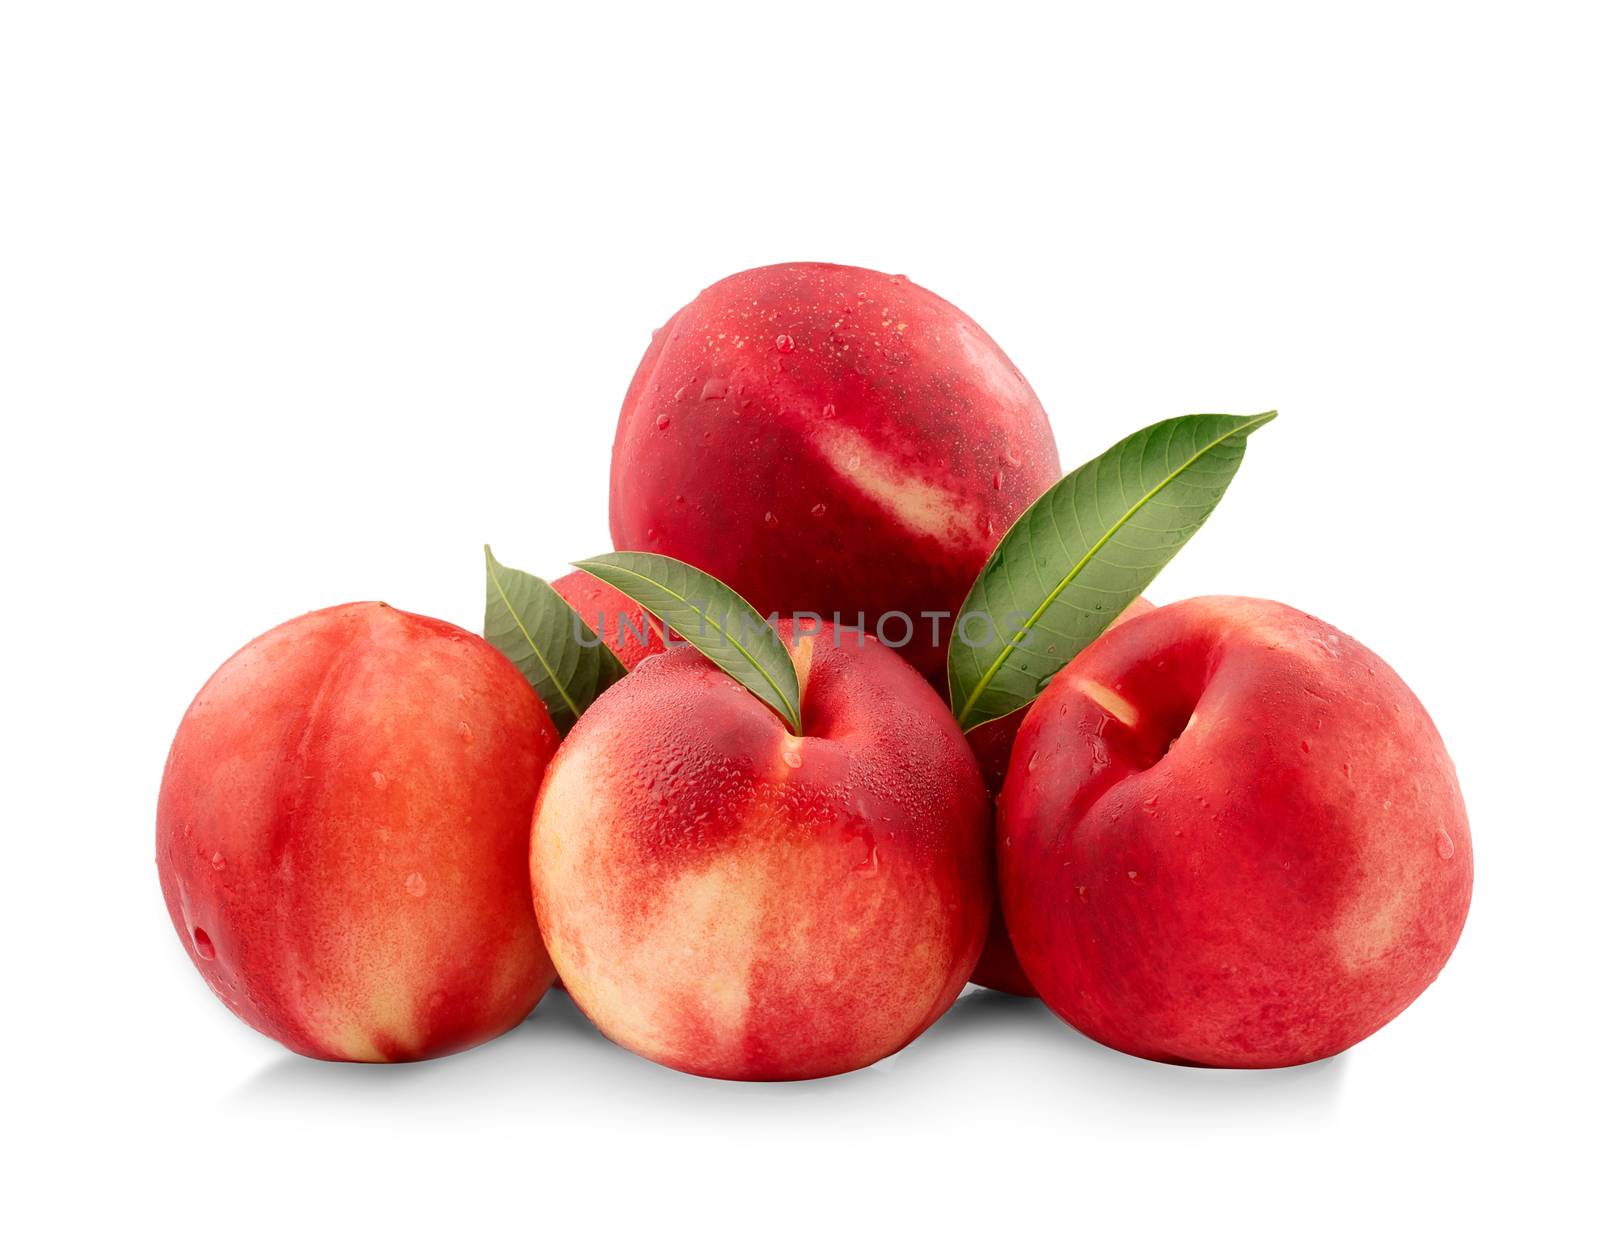 Nectarine peaches with slice and leaf isolated on white backgrou by freedomnaruk